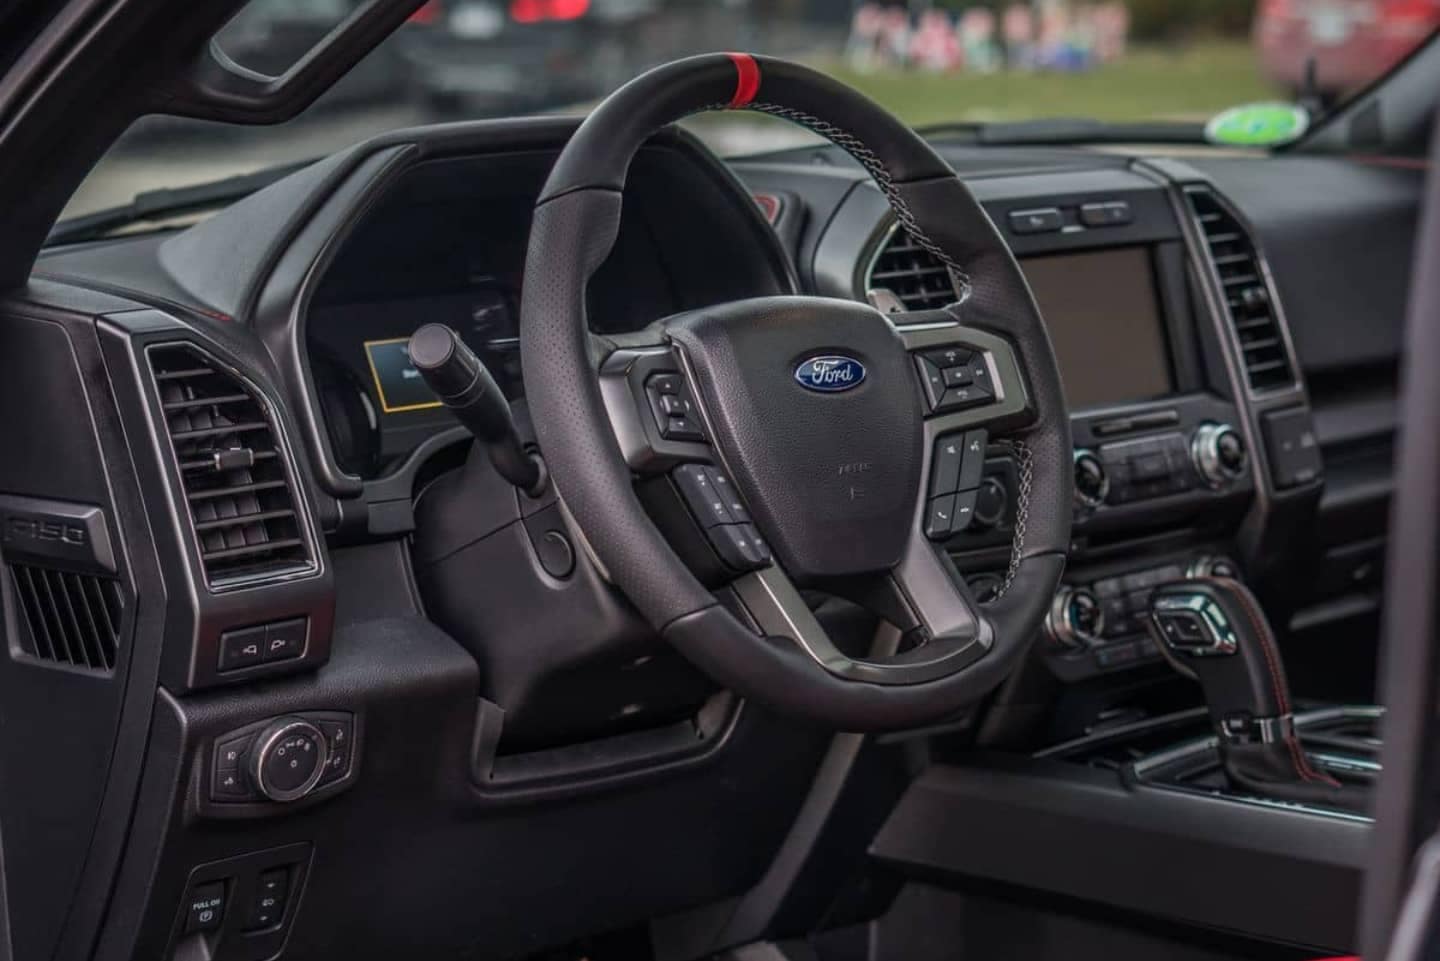 Used Ford F-150 Interior in black leather with red accents.